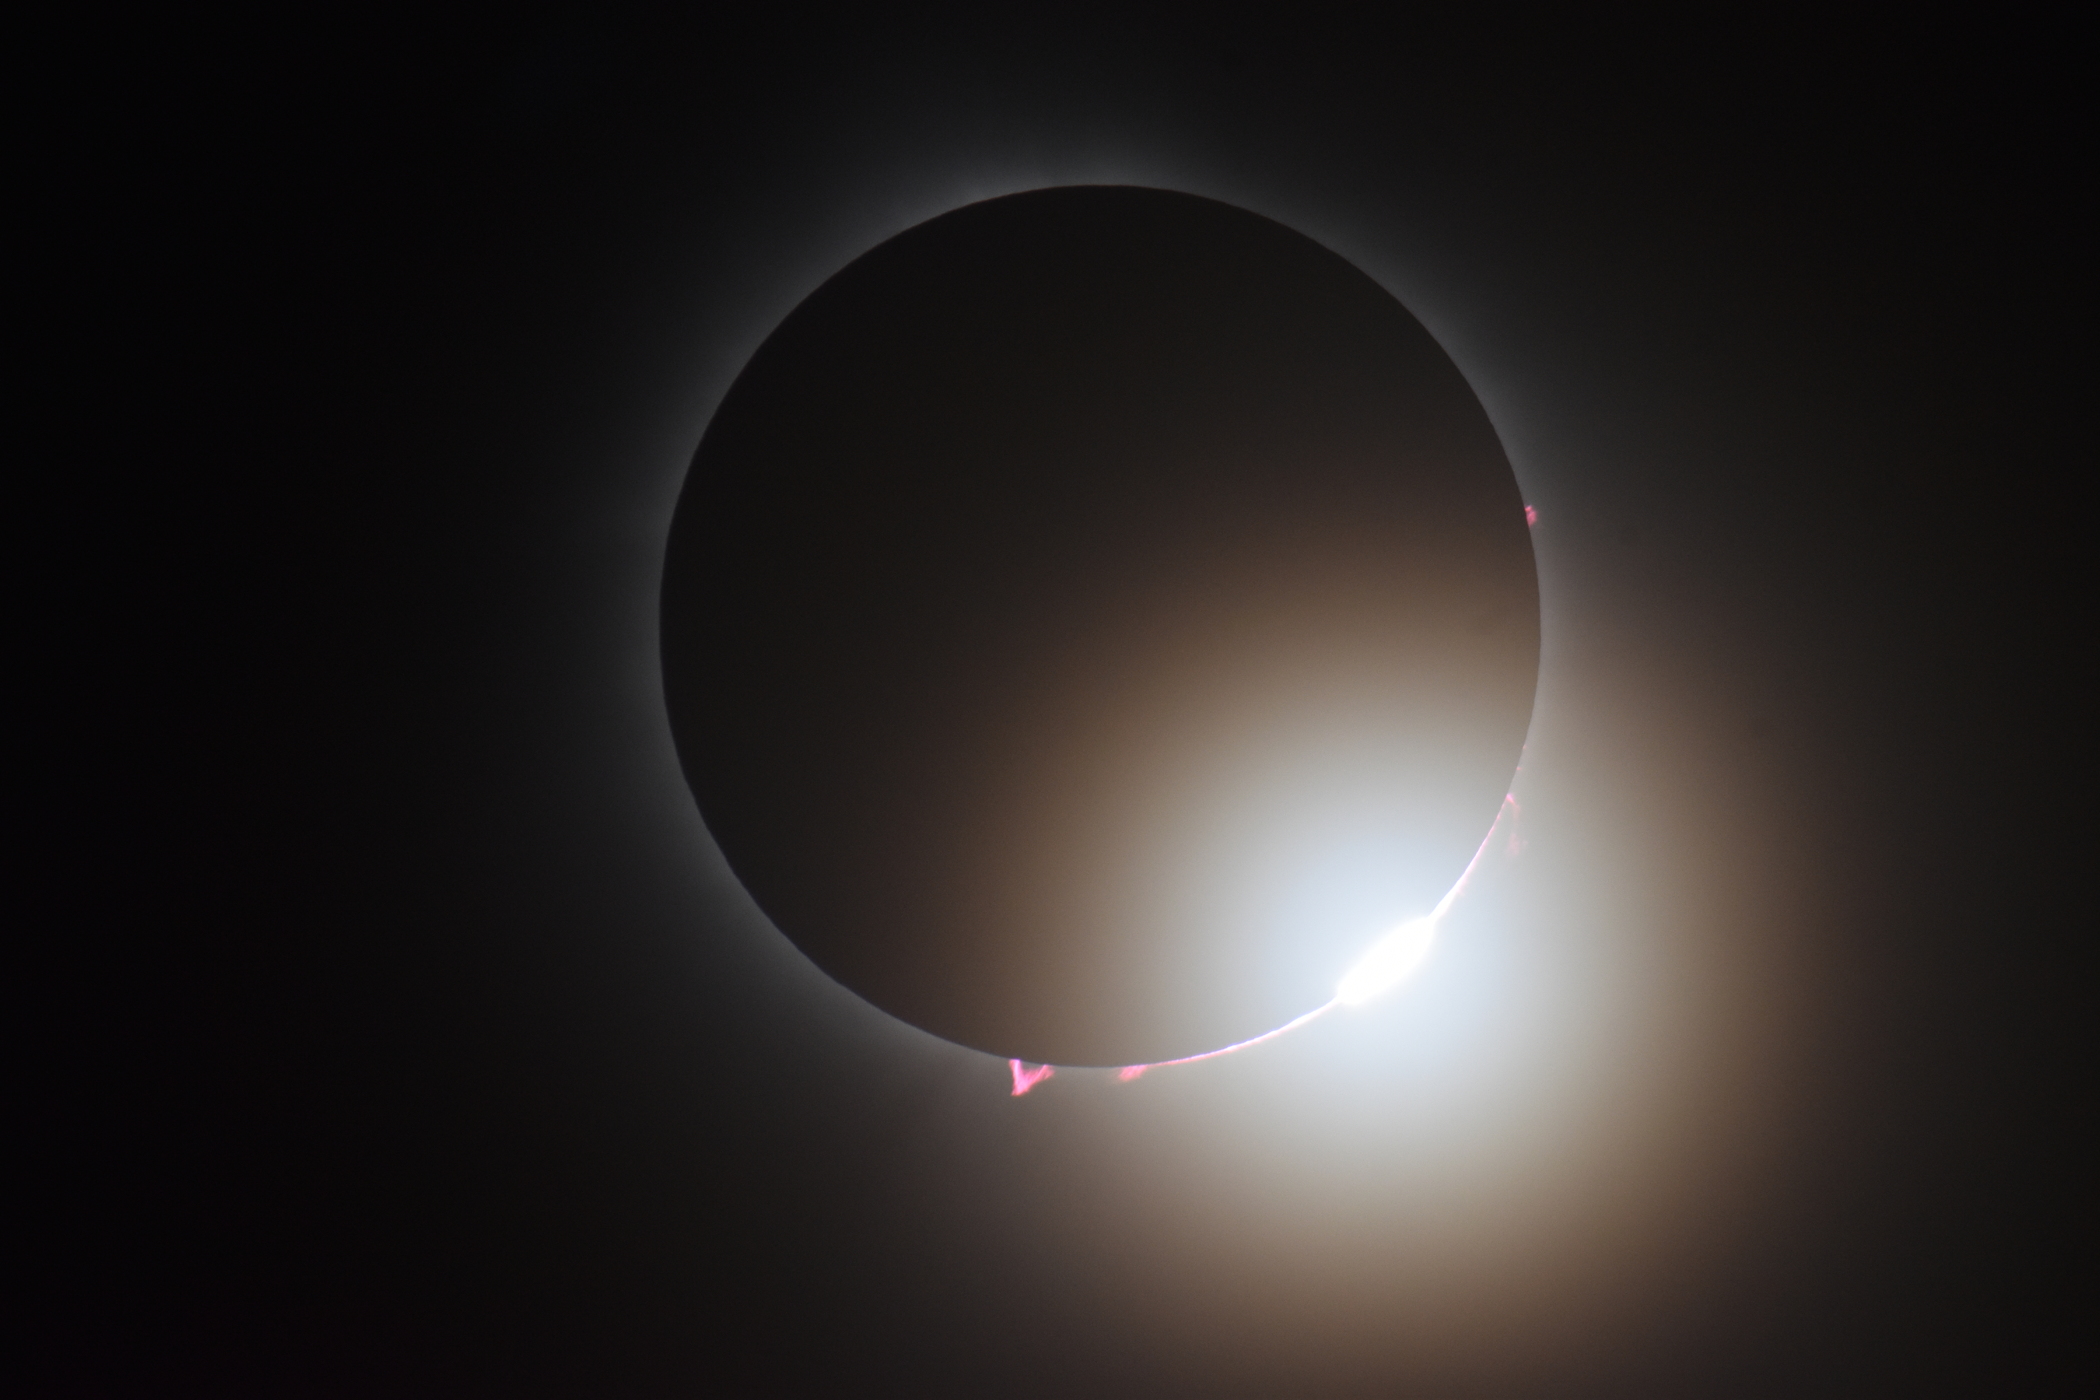 Diamond Ring at very end of totality